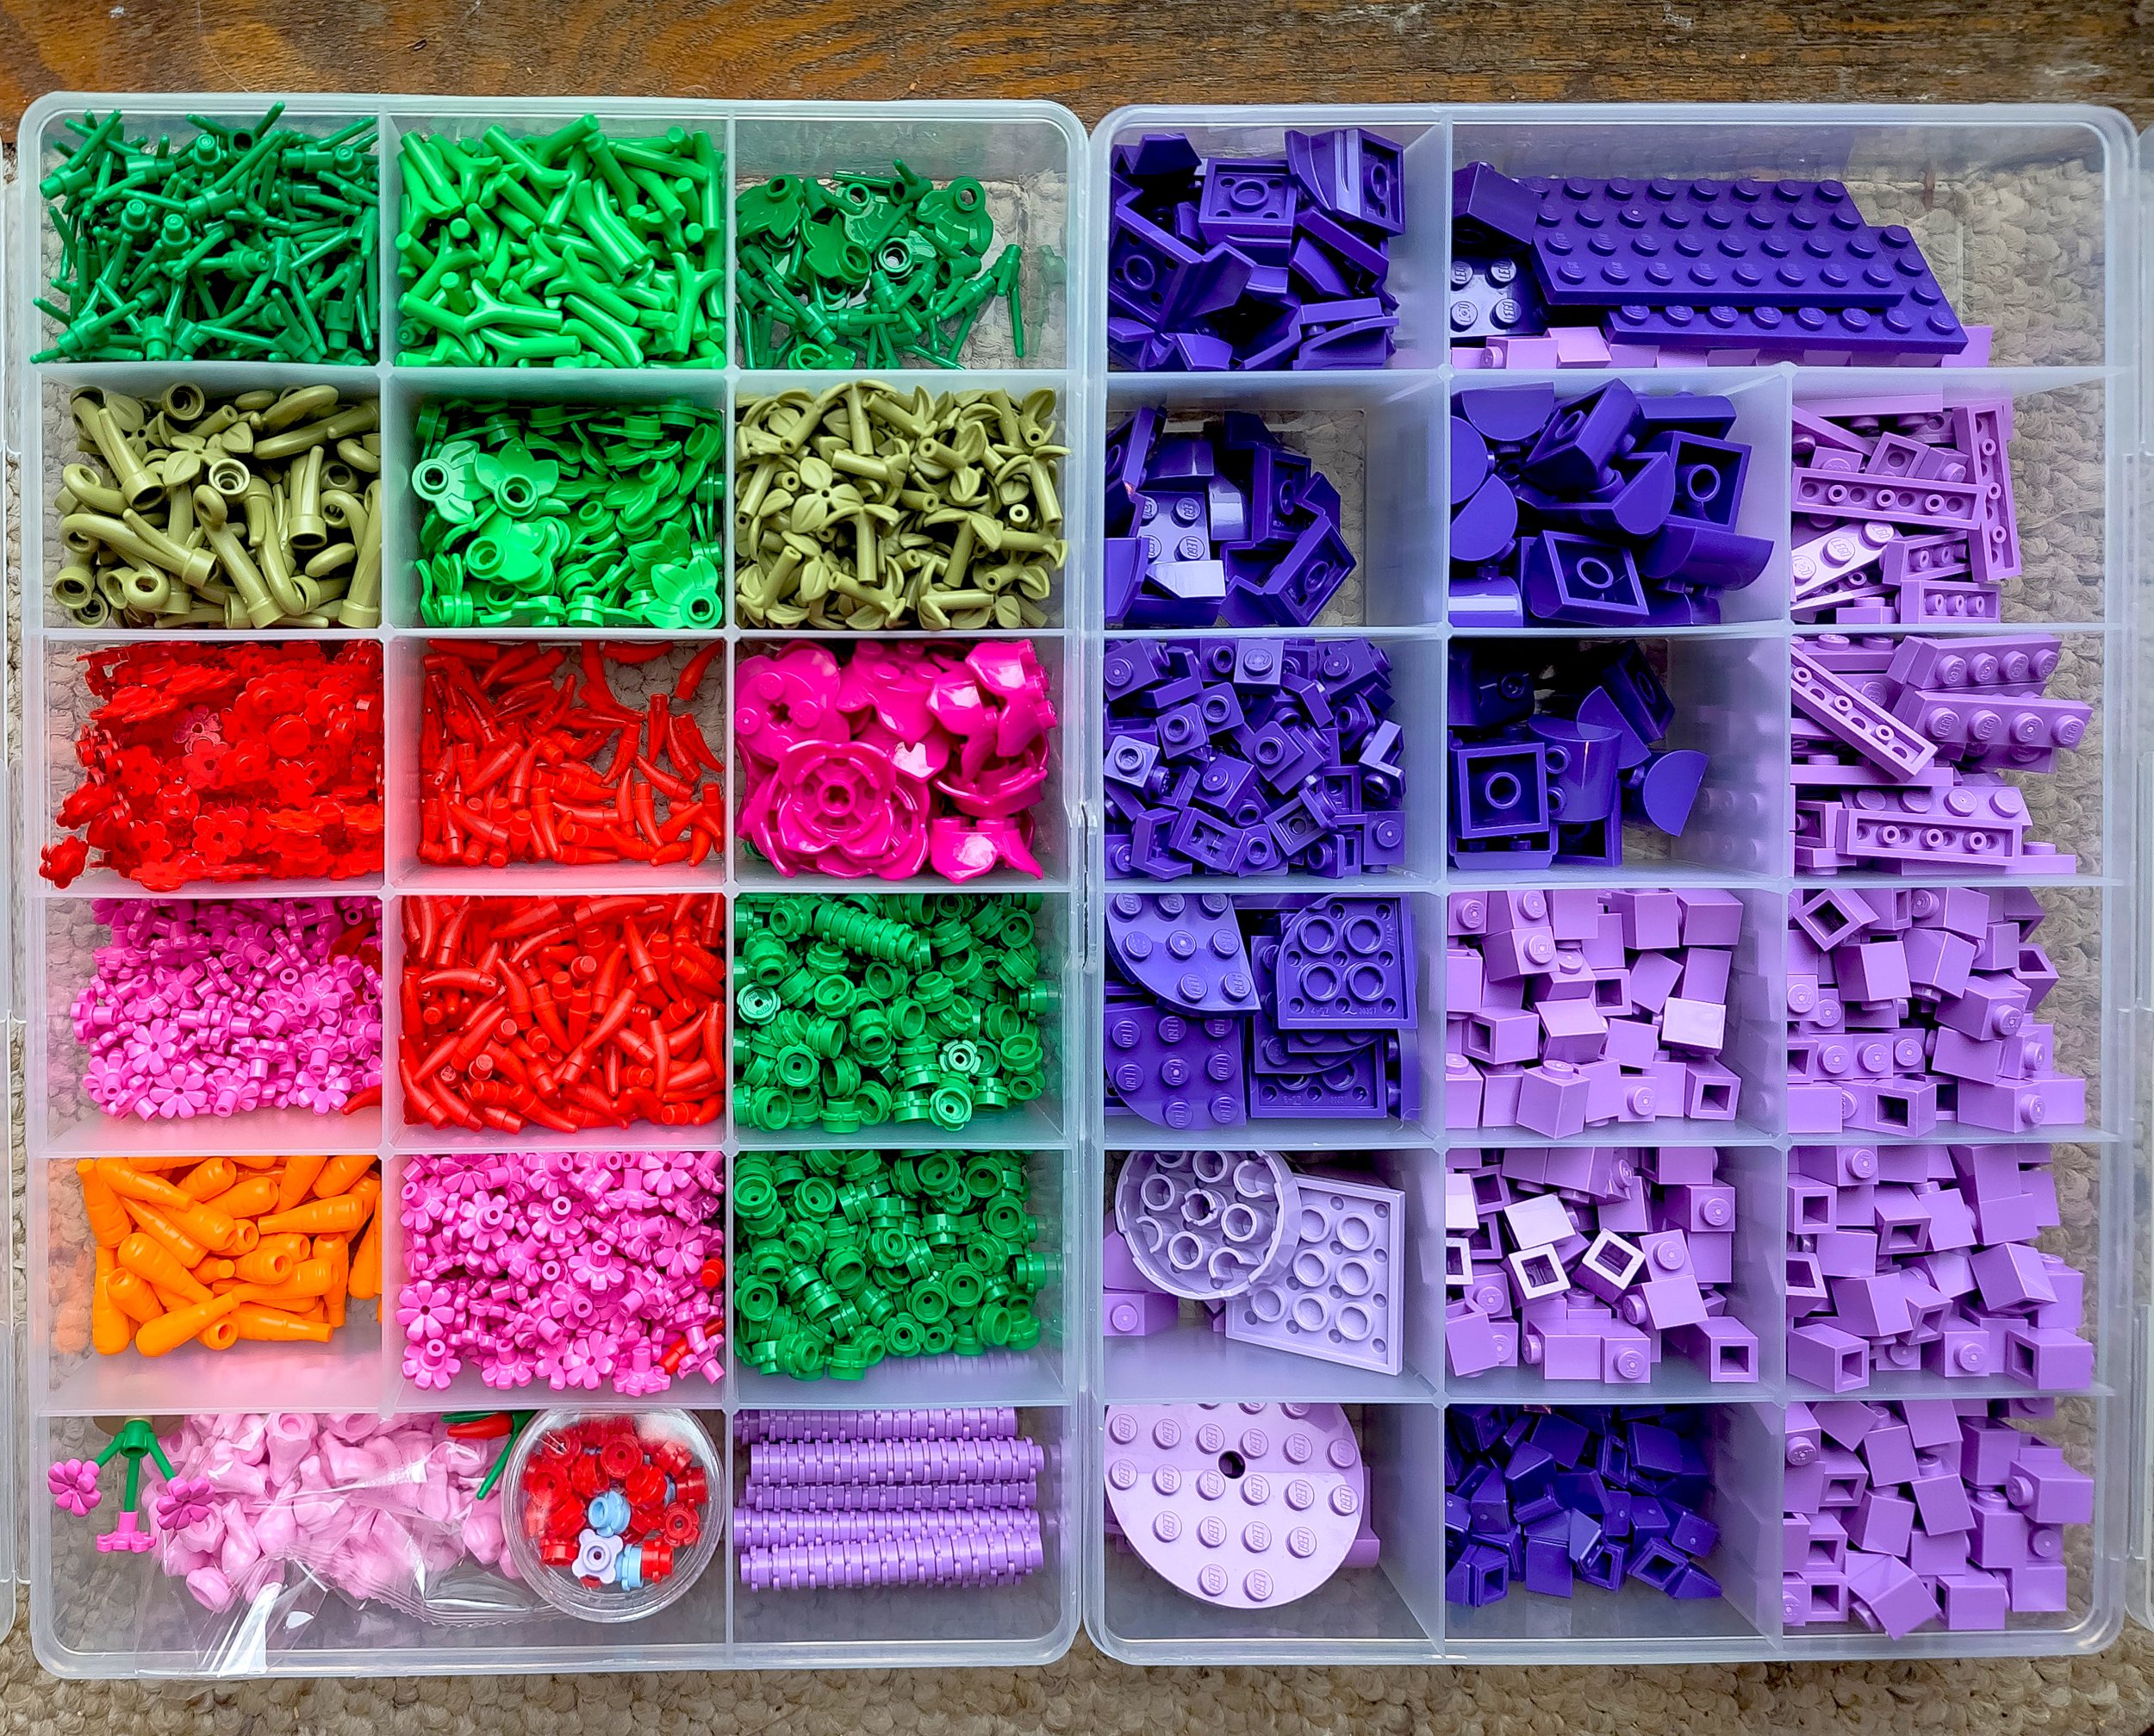 LEGO Categories for Sorting - Brick Land